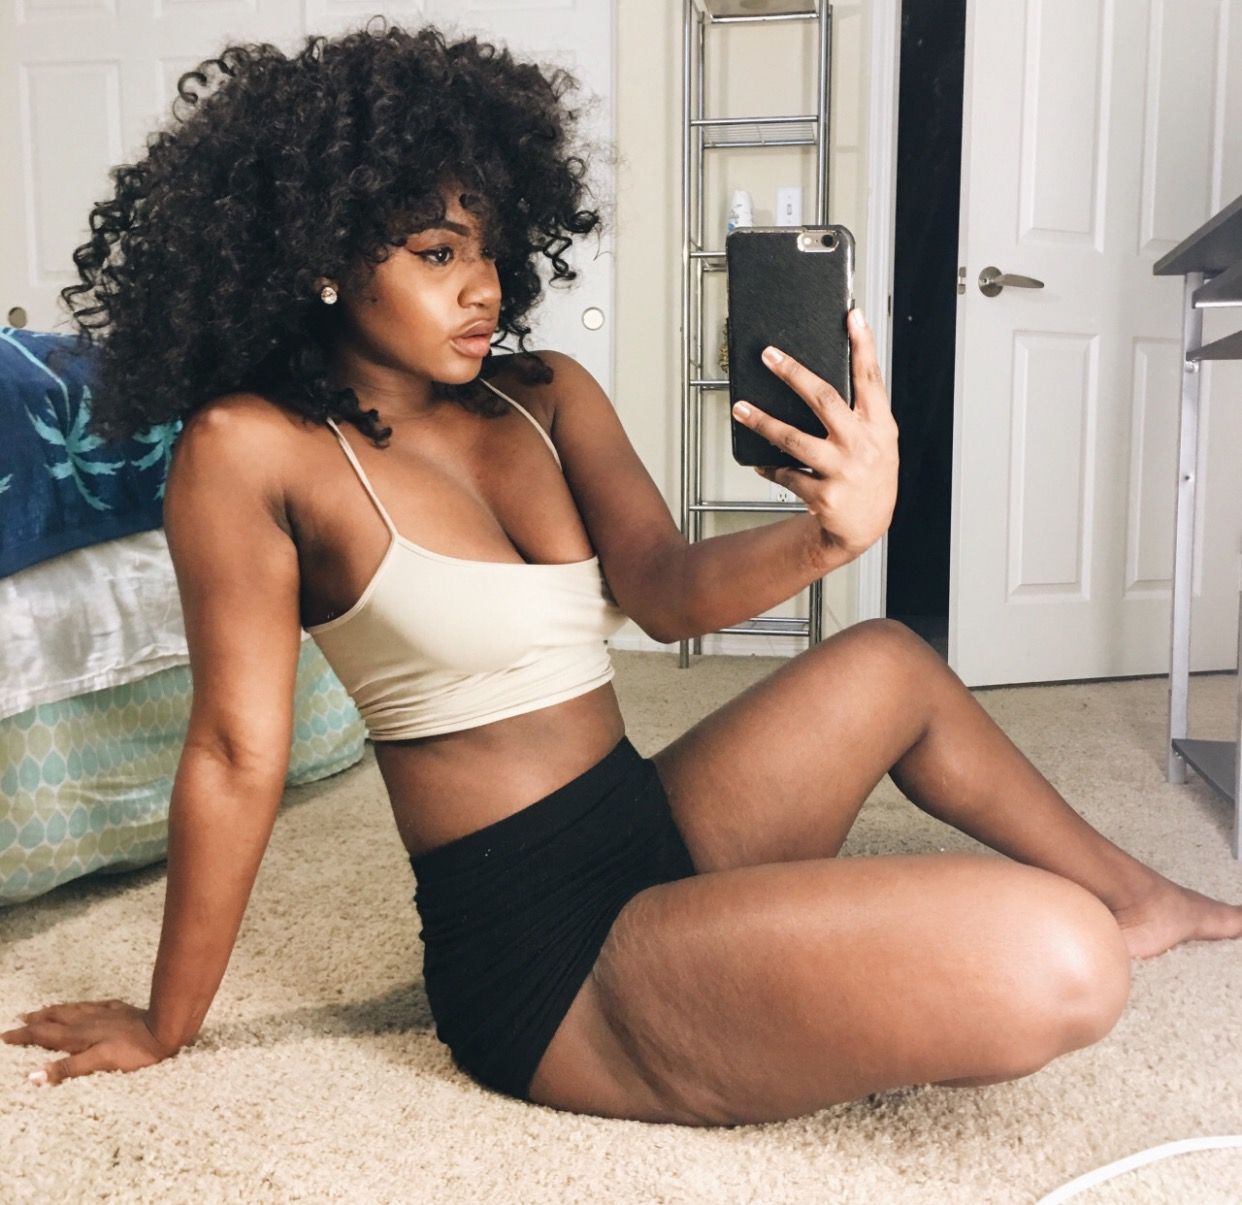 The Black Girls of Tumblr — Have Sex With Black Girls Living In Your...